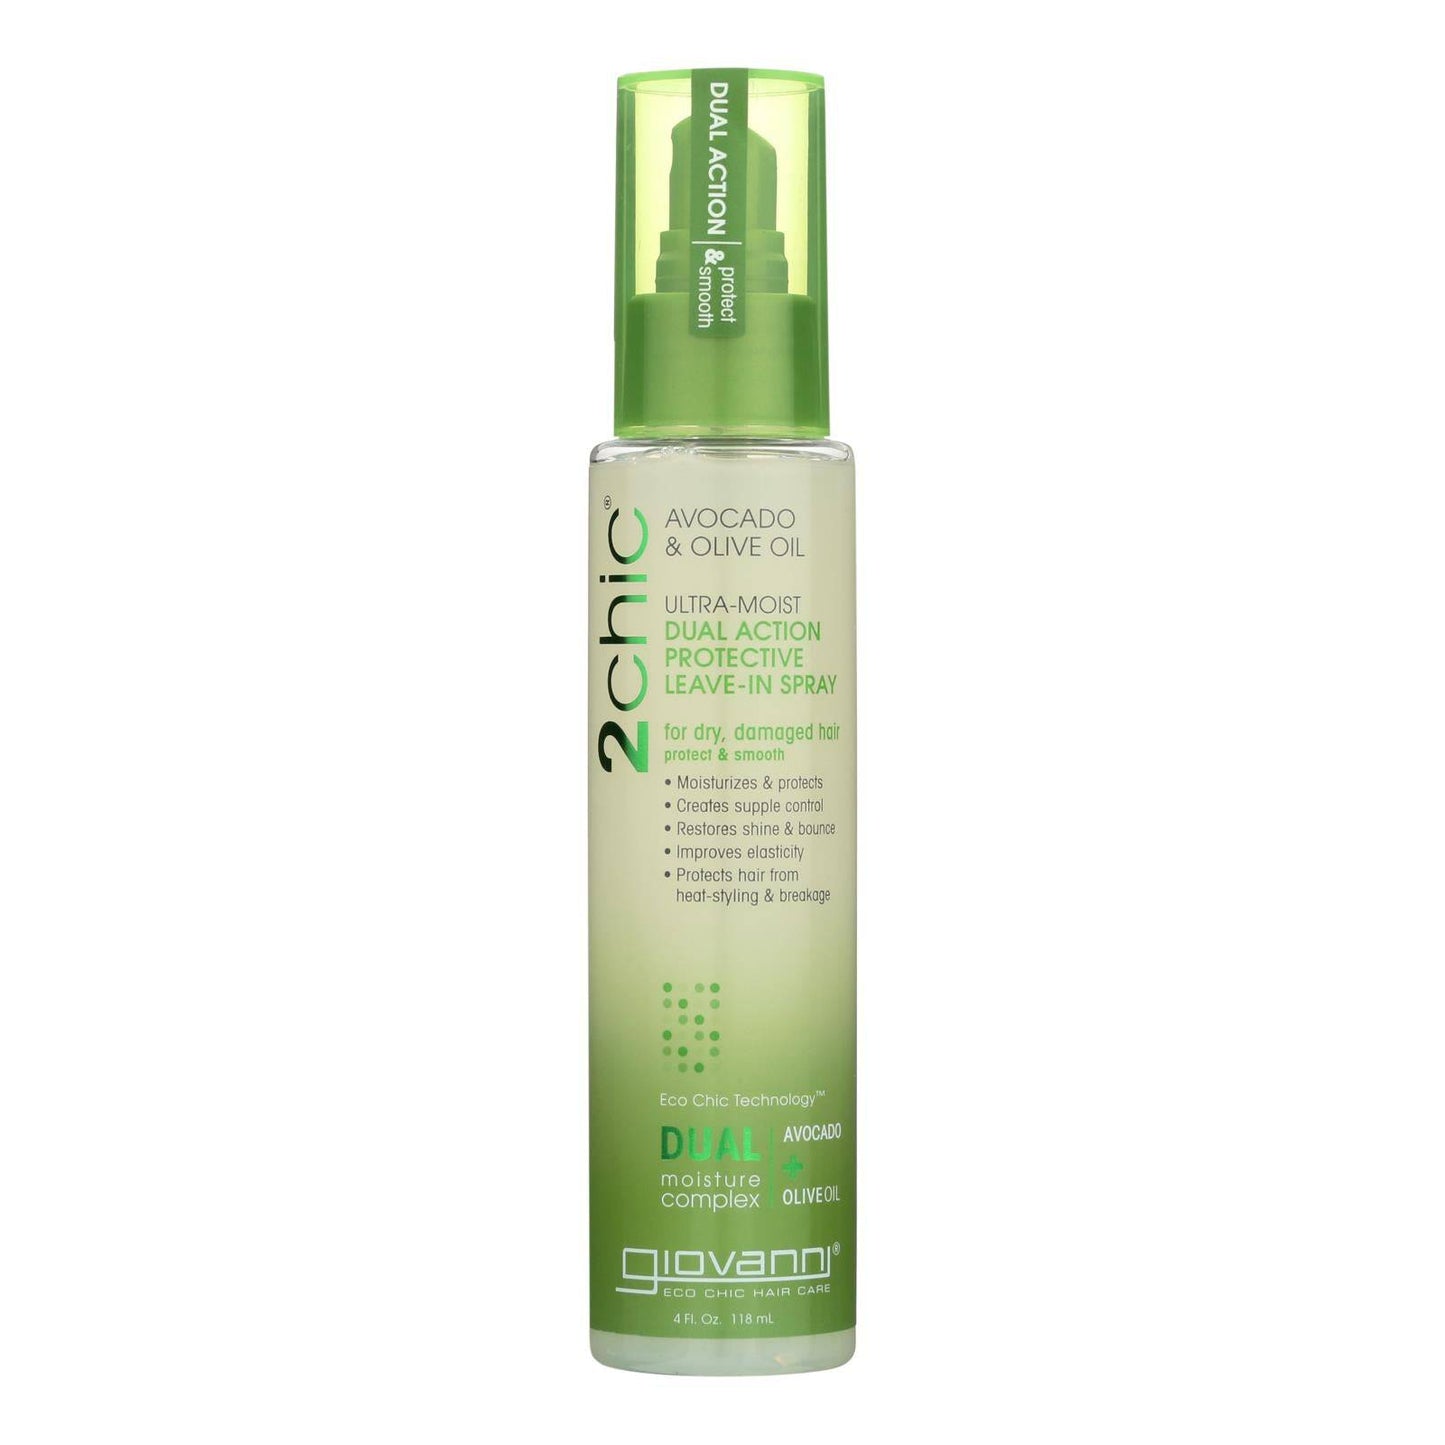 Buy Giovanni Hair Care Products Spray Leave In Conditioner - 2chic Avocado - 4 Oz  at OnlyNaturals.us